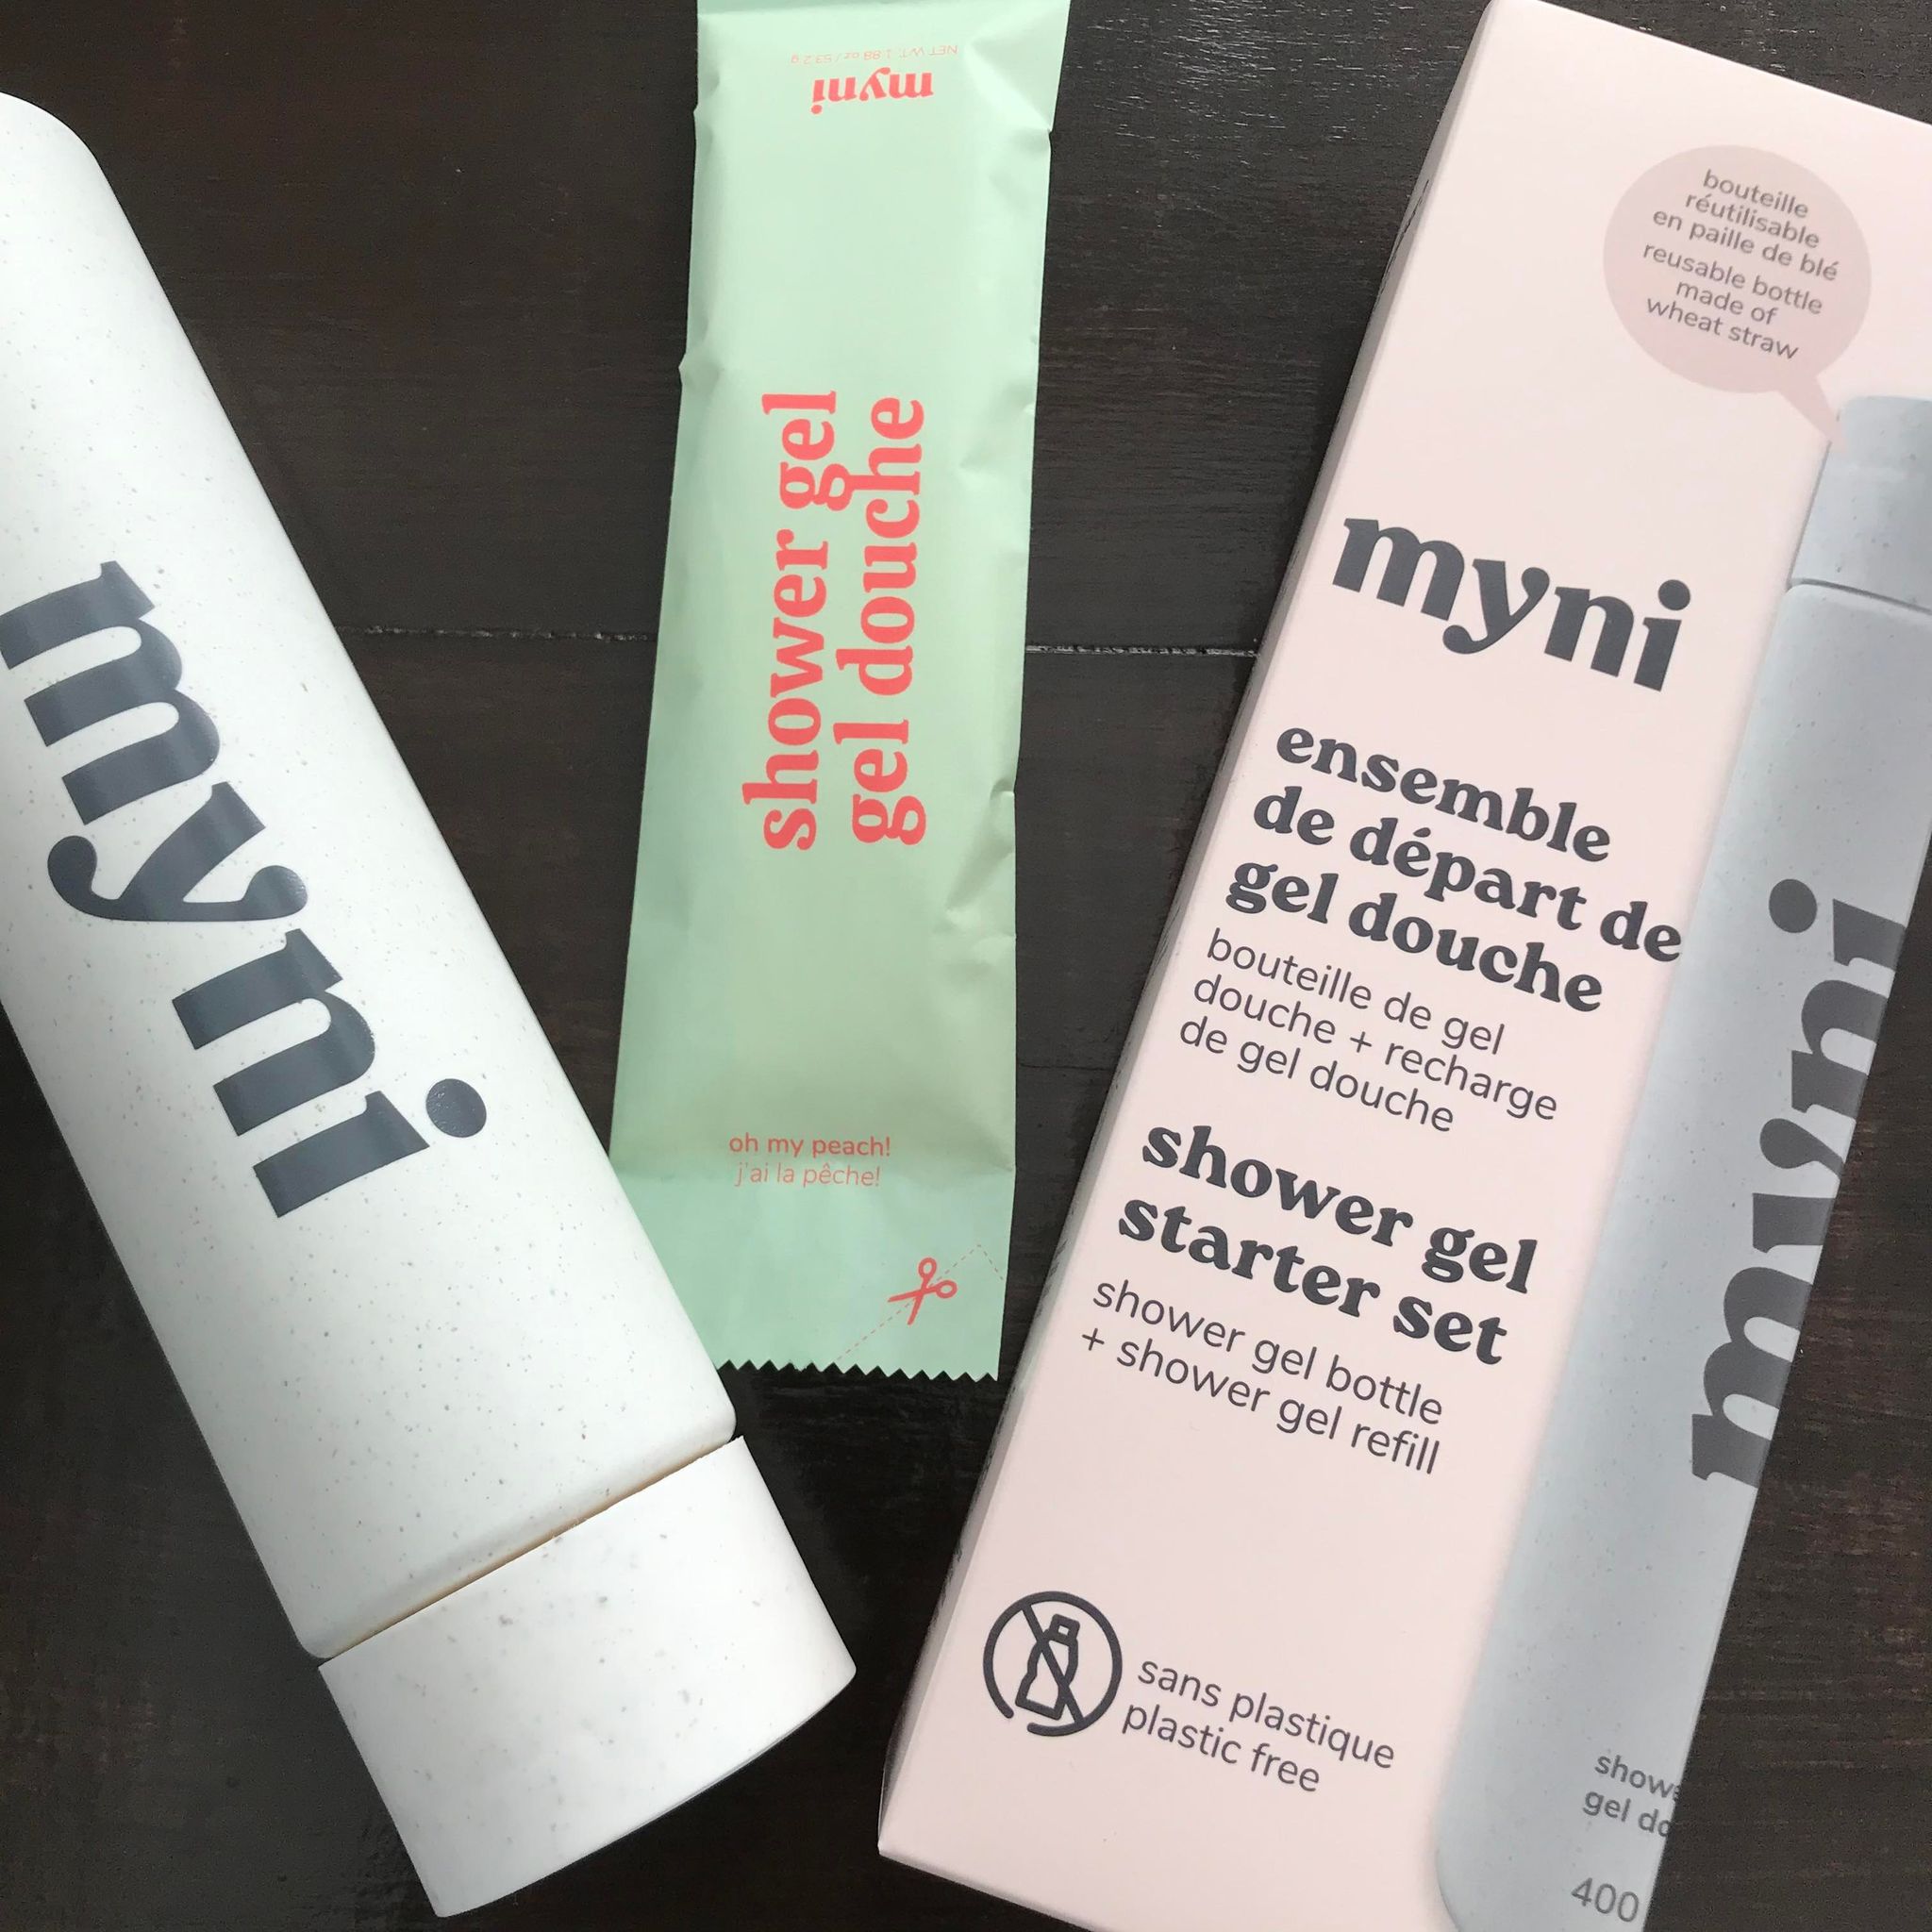 Myni Shower Gel Starter Set is the first Canadian made shower gel in the form of a powder that can be rehydrated in water.  It comes with a 400 ml wheat straw bottle and a 'Oh My Peach' shower gel powder.